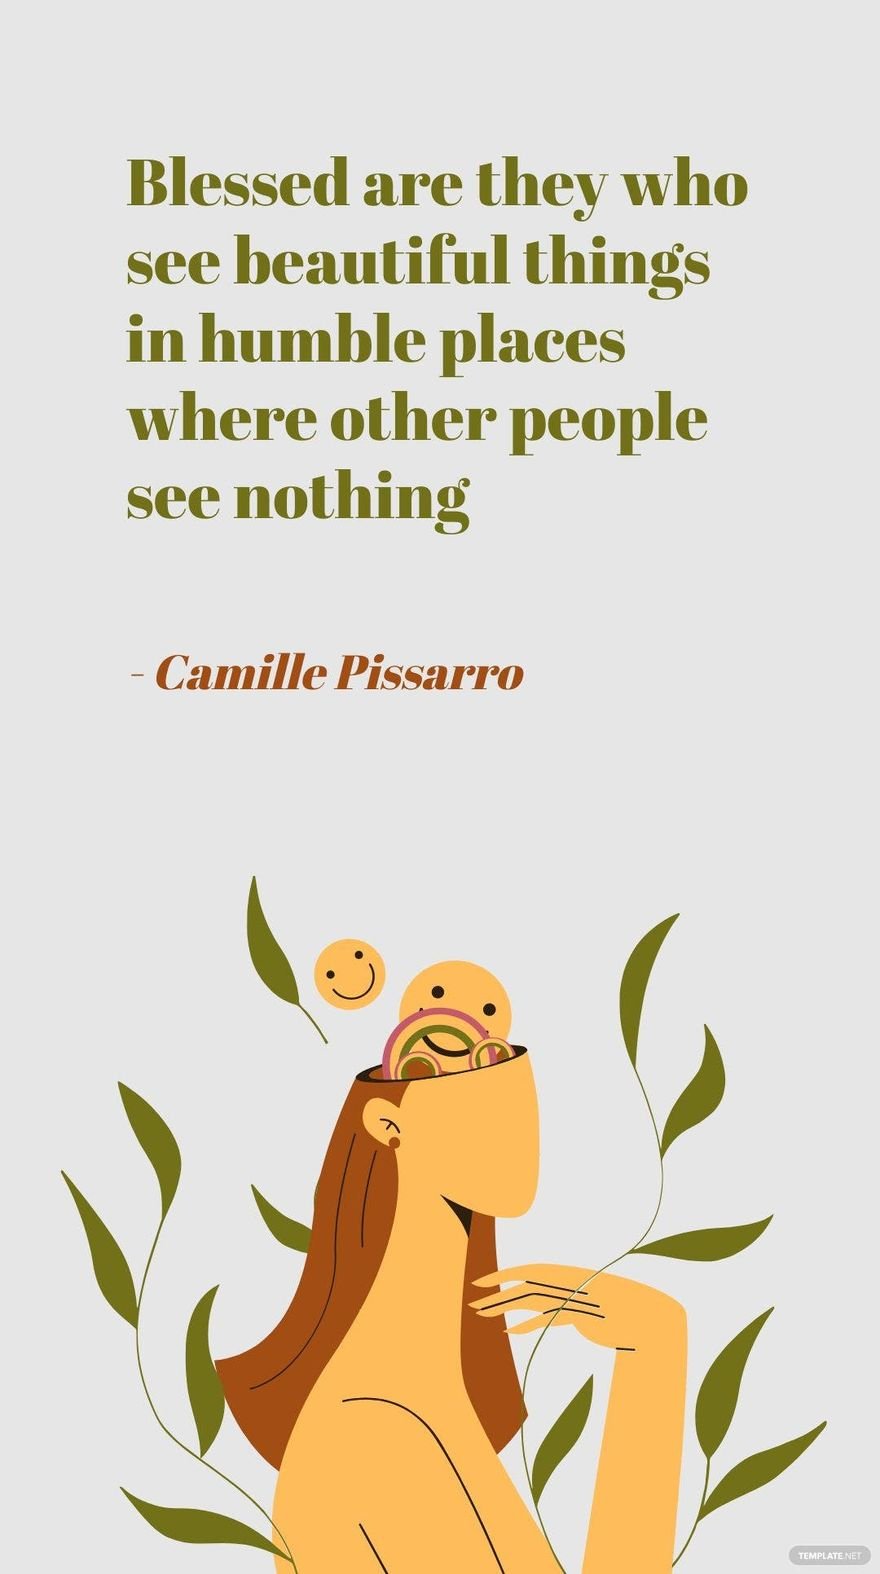 Camille Pissarro - Blessed are they who see beautiful things in humble places where other people see nothing